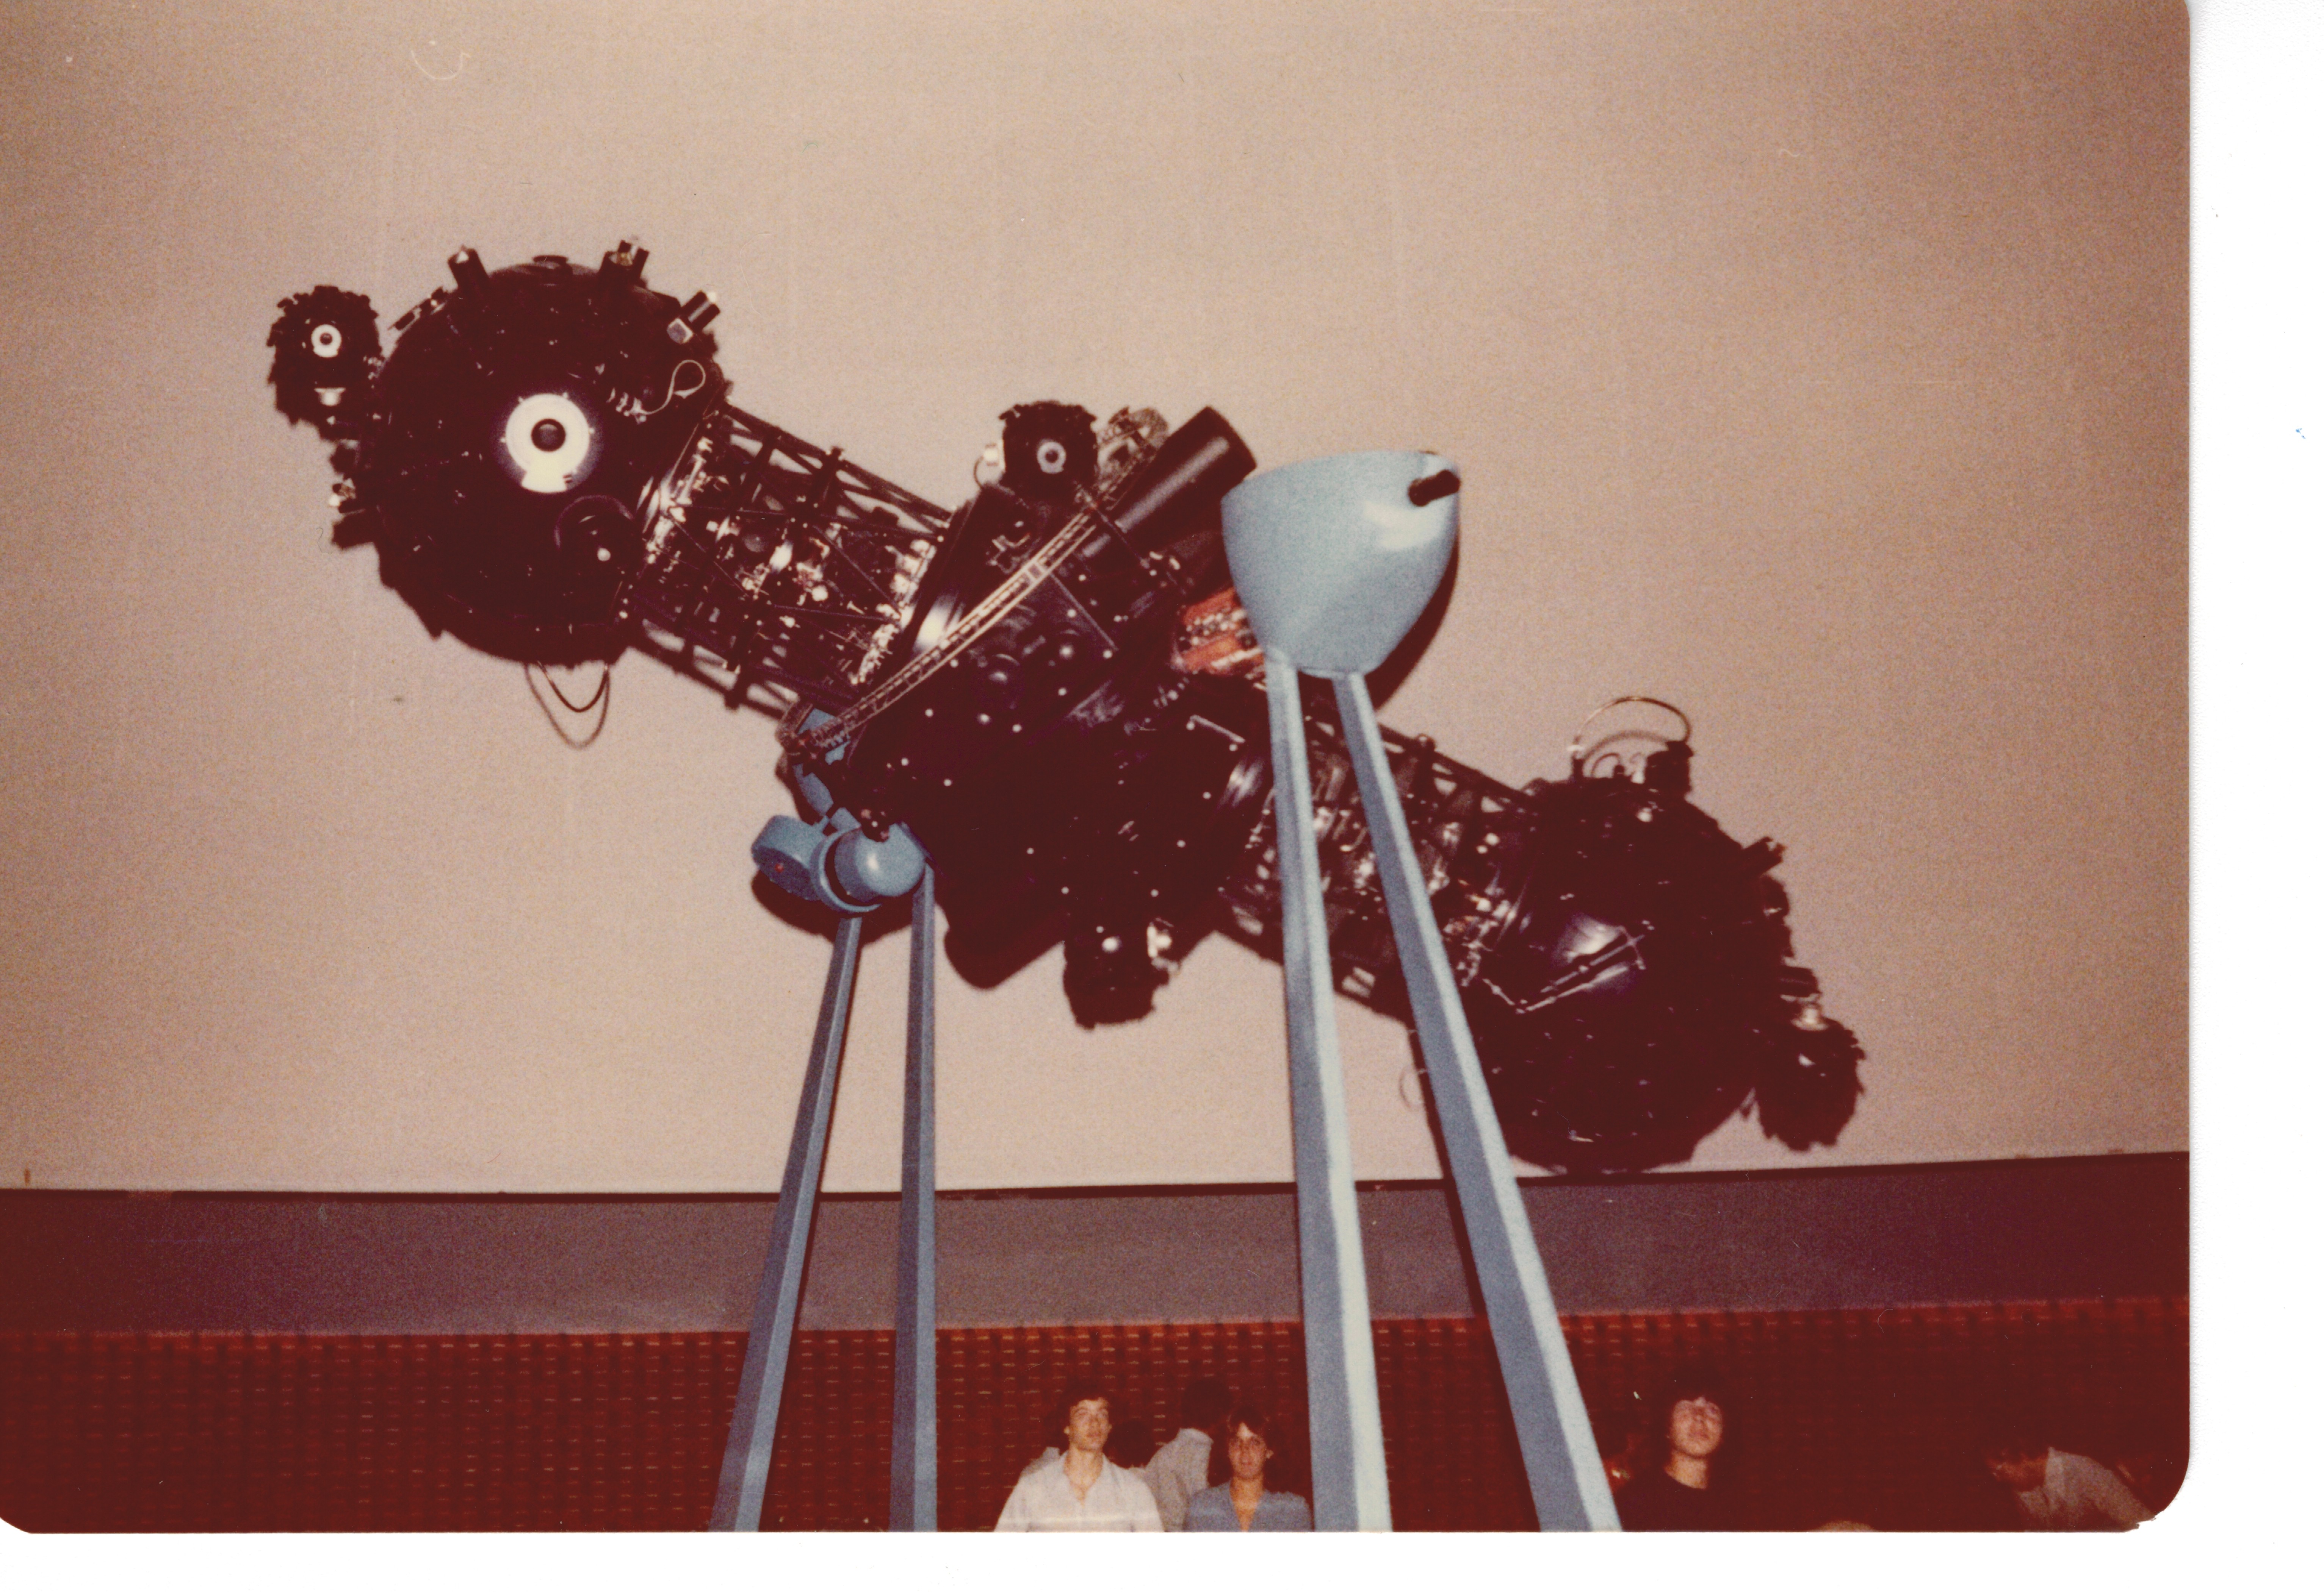 Historic photo from 1977 - Full view of the projector at the McLaughlin Planetarium in Royal Ontario Museum